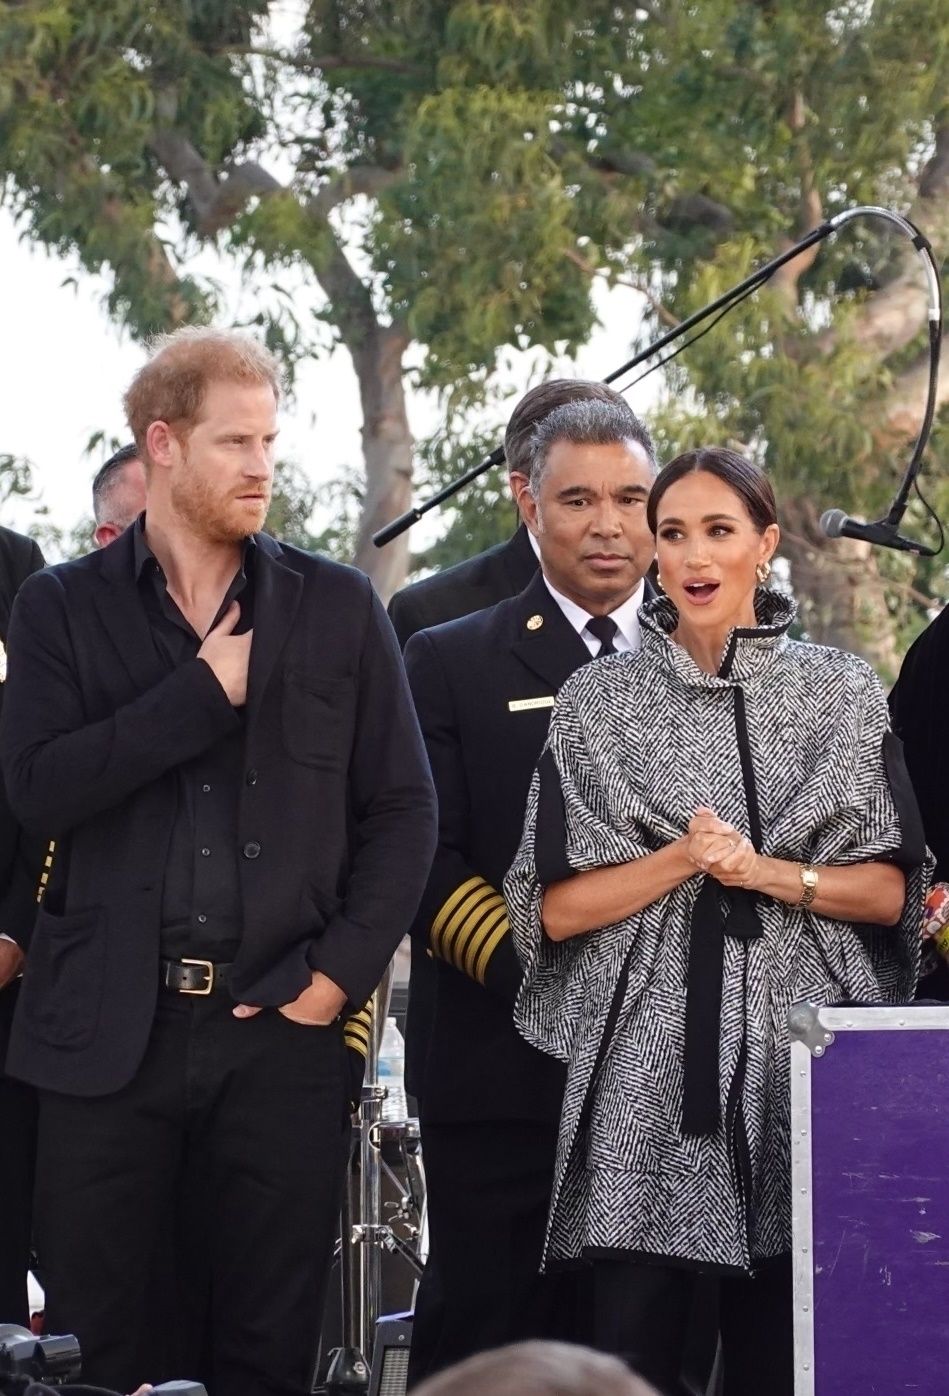 The Duke and Duchess of Sussex made a surprise appearance in Sanata Barbara 